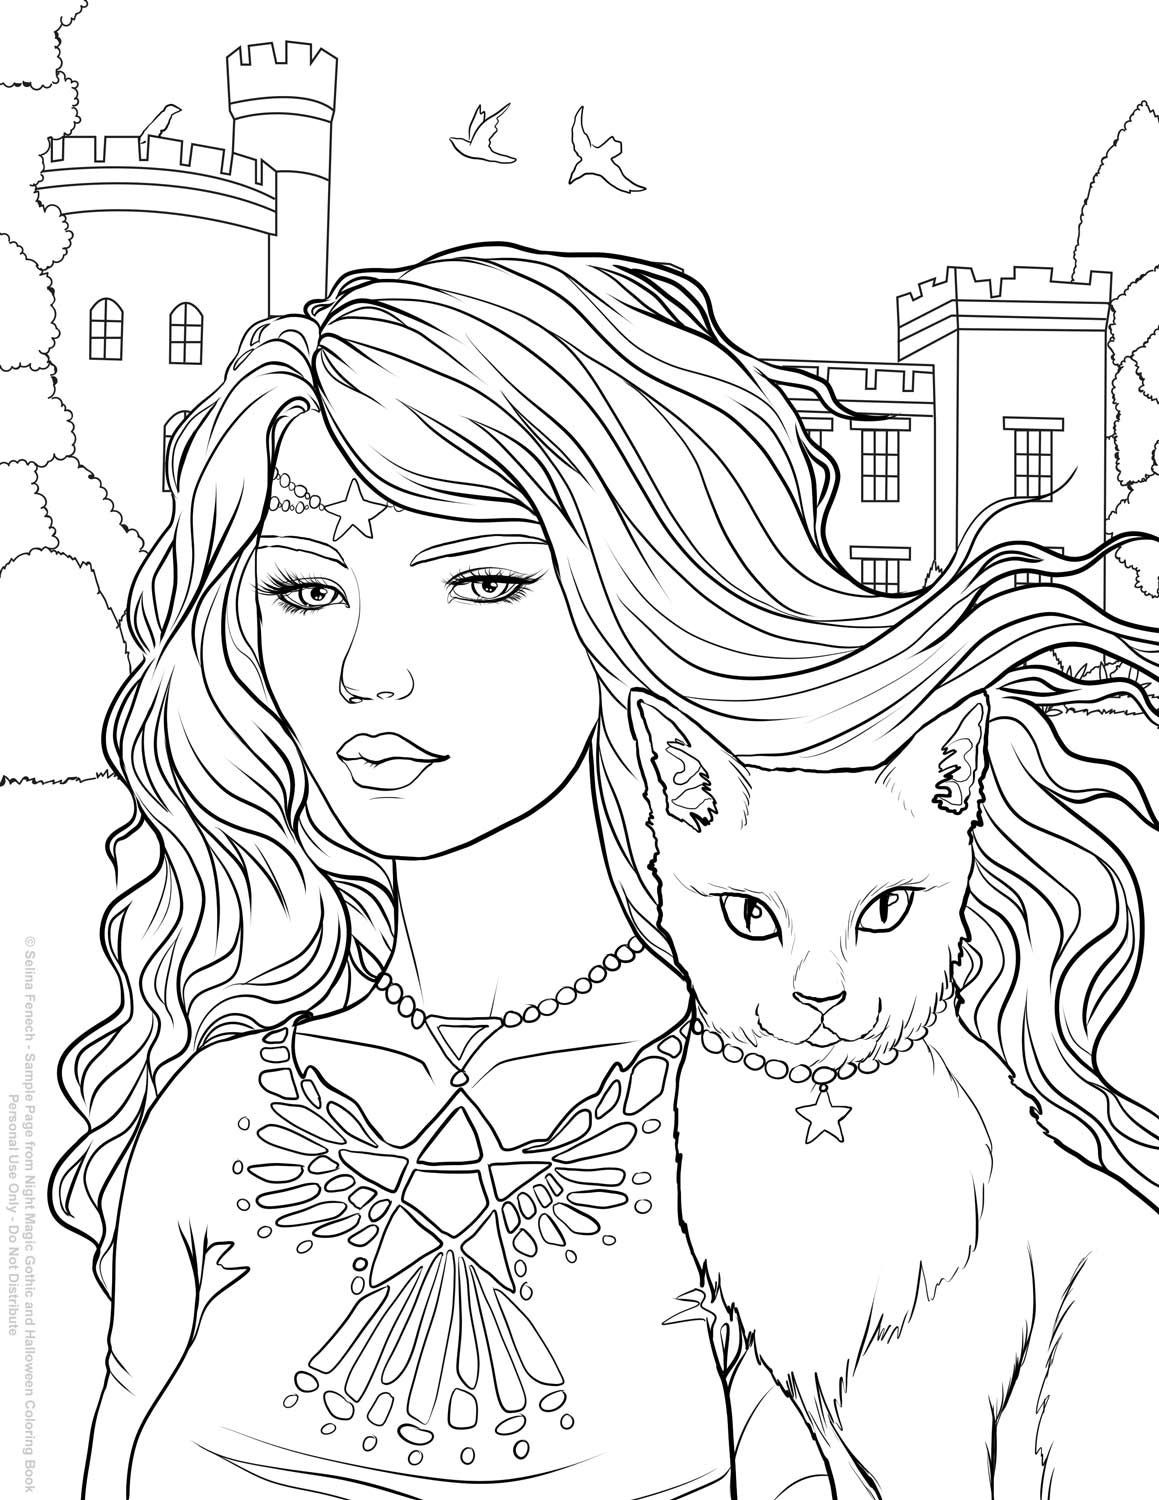 Coloring Pages Of Girls For Adults
 Selina Fenech halloween coloring page